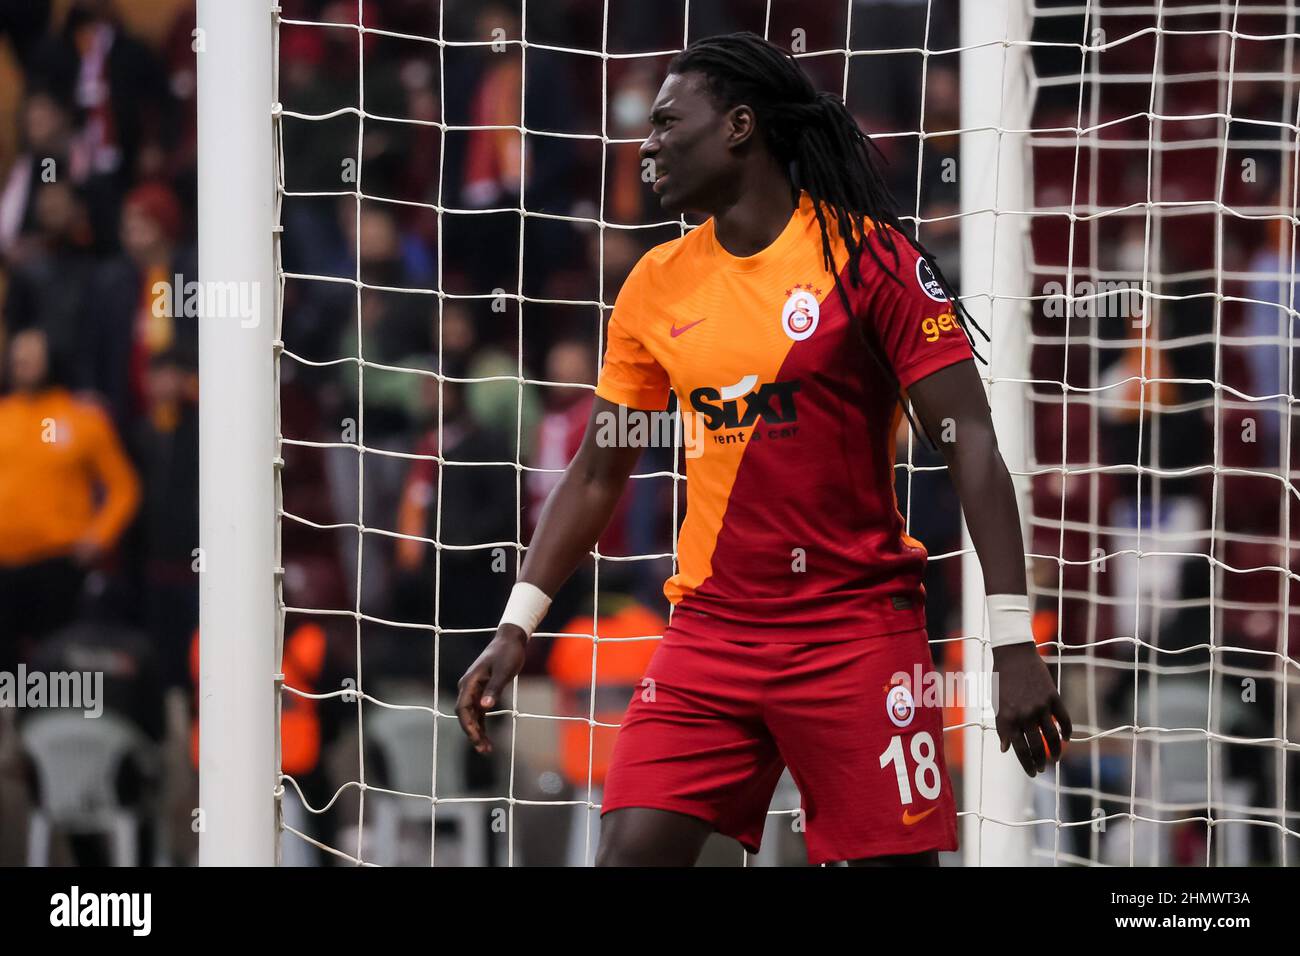 ISTANBUL, TURKEY - FEBRUARY 12: Bafetimbi Gomis of Galatasaray during the Turkish Super Lig match between Galatasaray and Kayserispor at the Nef Stadium on February 12, 2022 in Istanbul, Turkey (Photo by Orange Pictures) Stock Photo